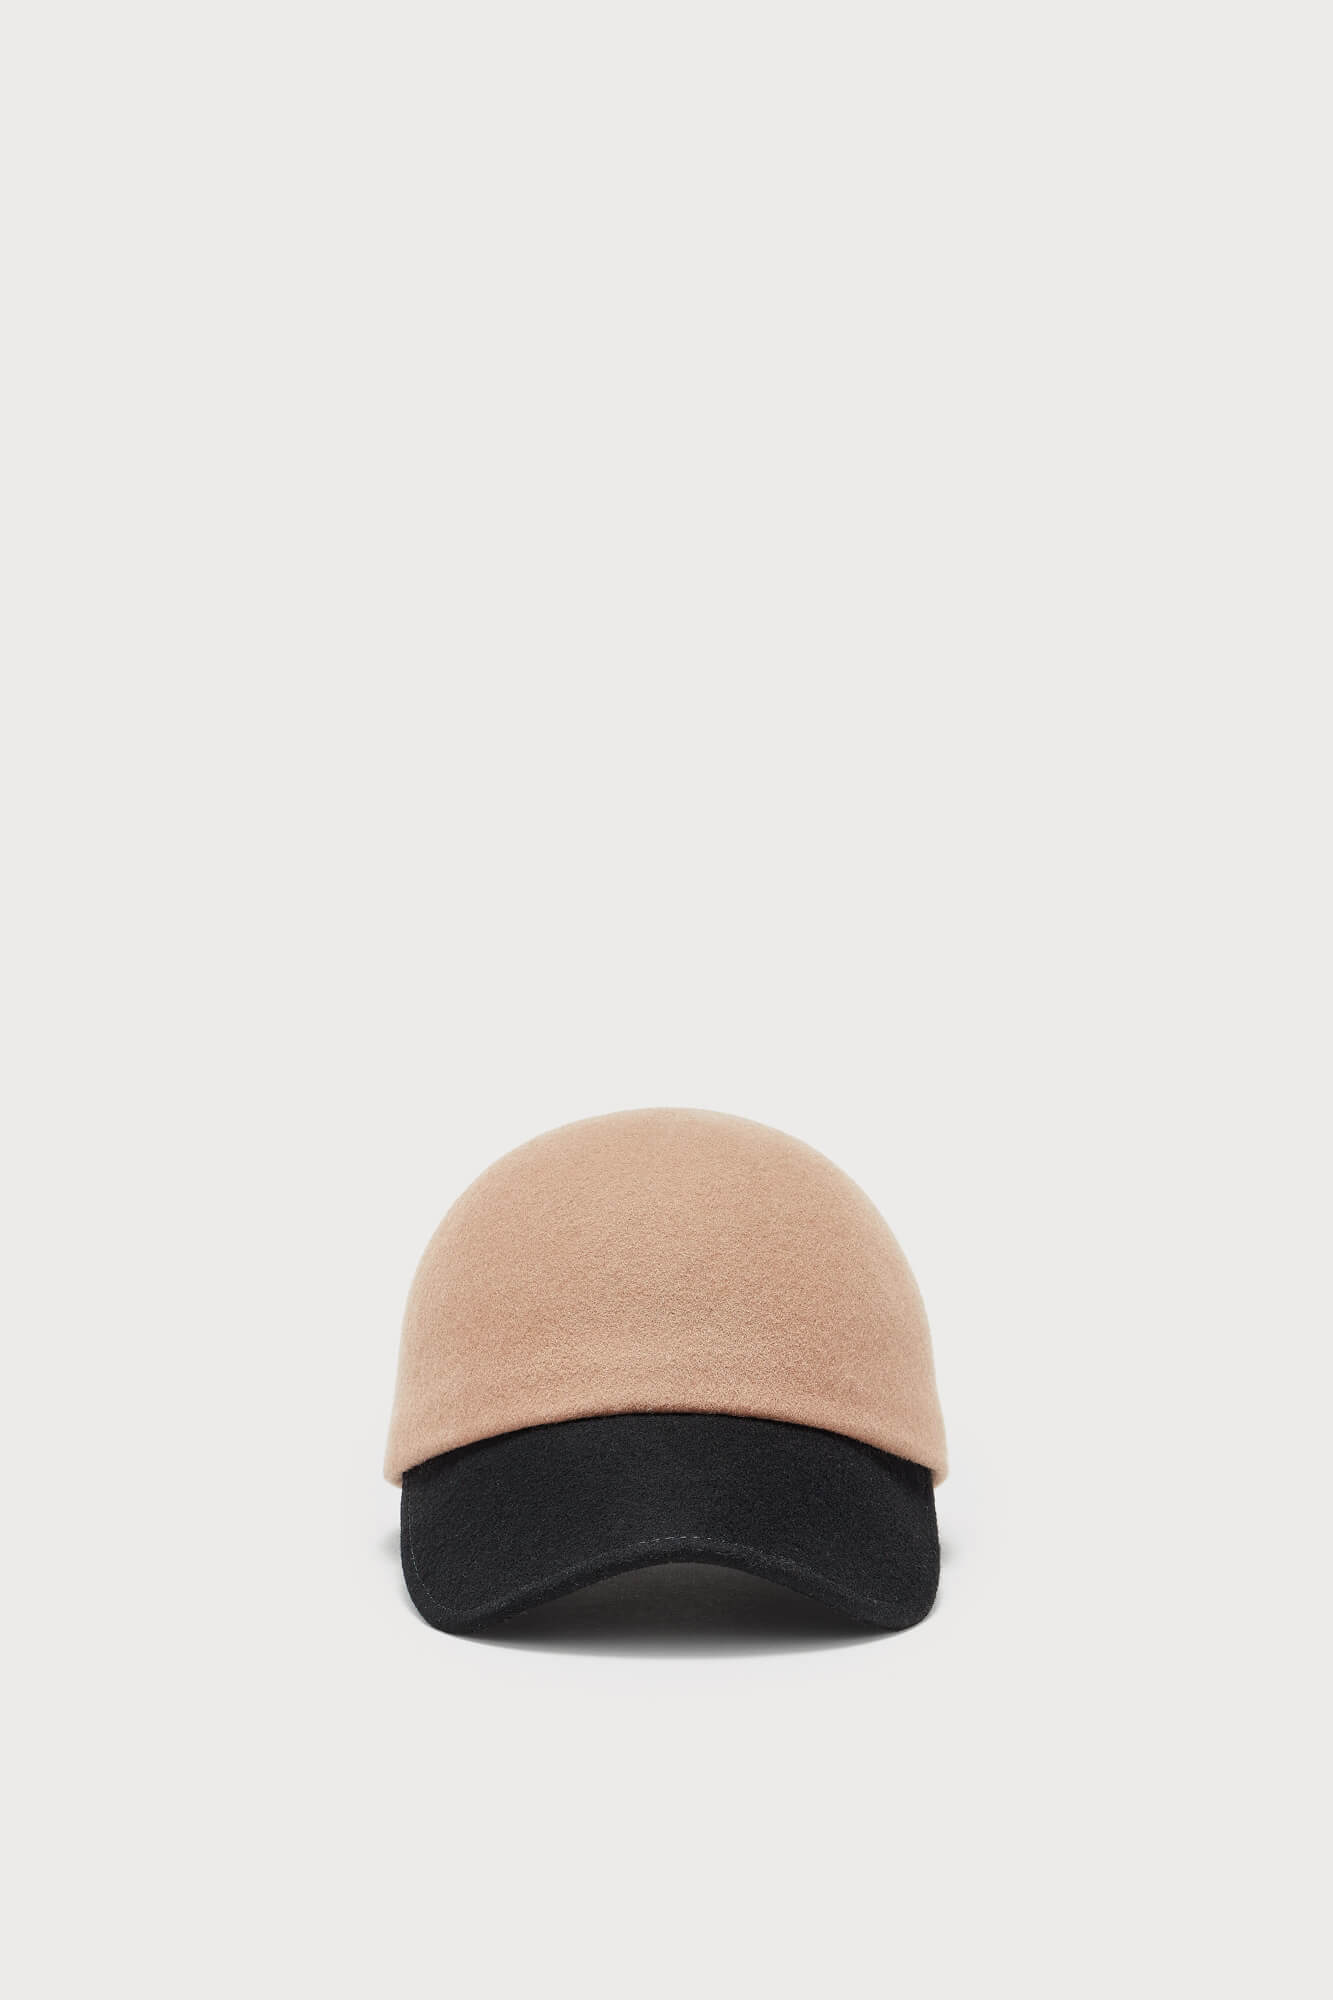 Camel and Black Wool Cap